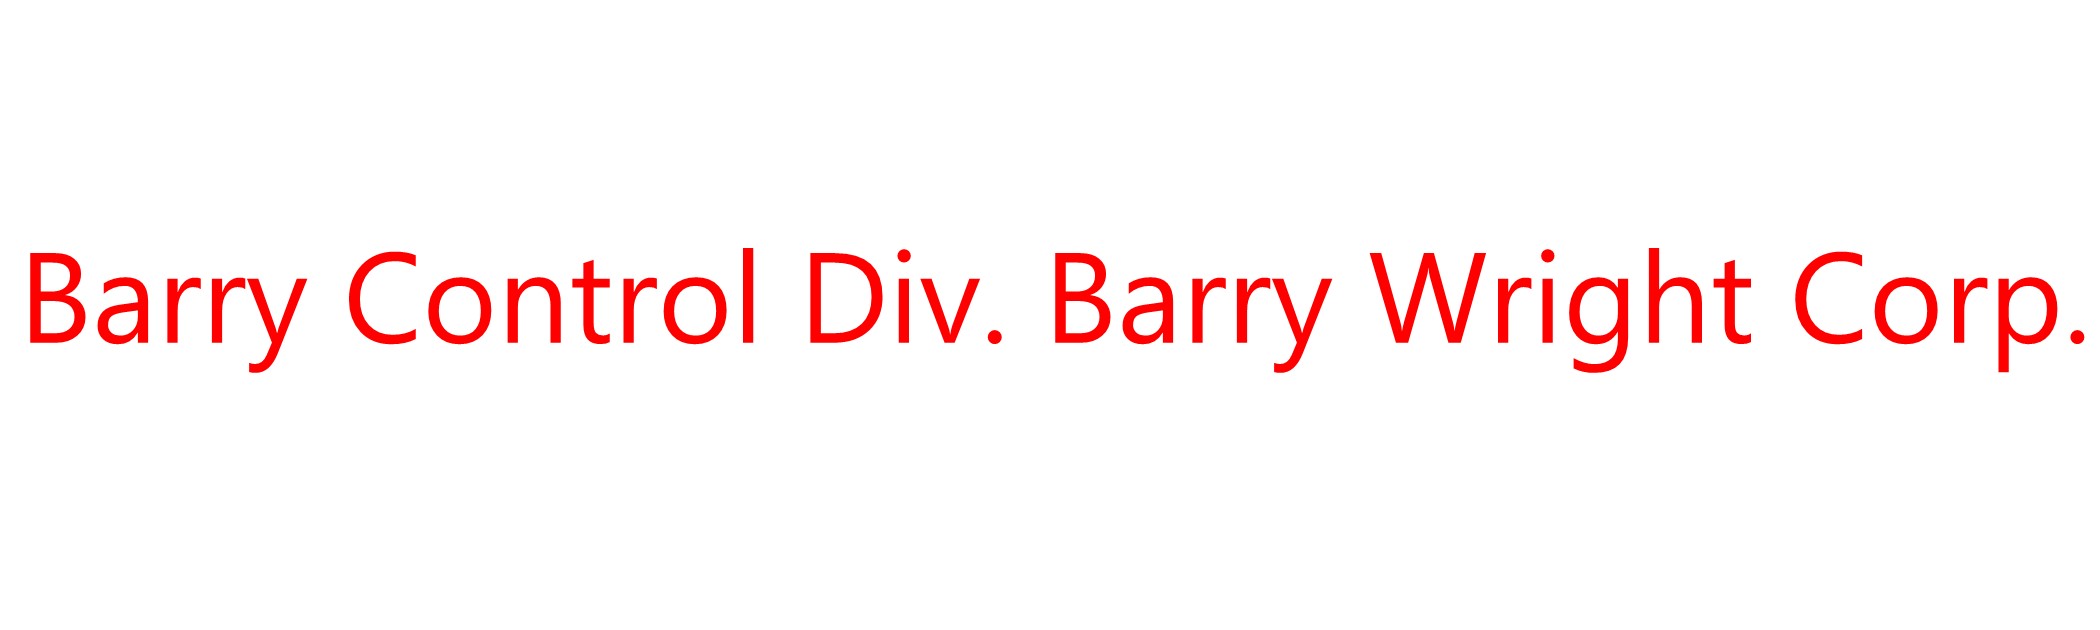 Barry Control Div. Barry Wright Corp.